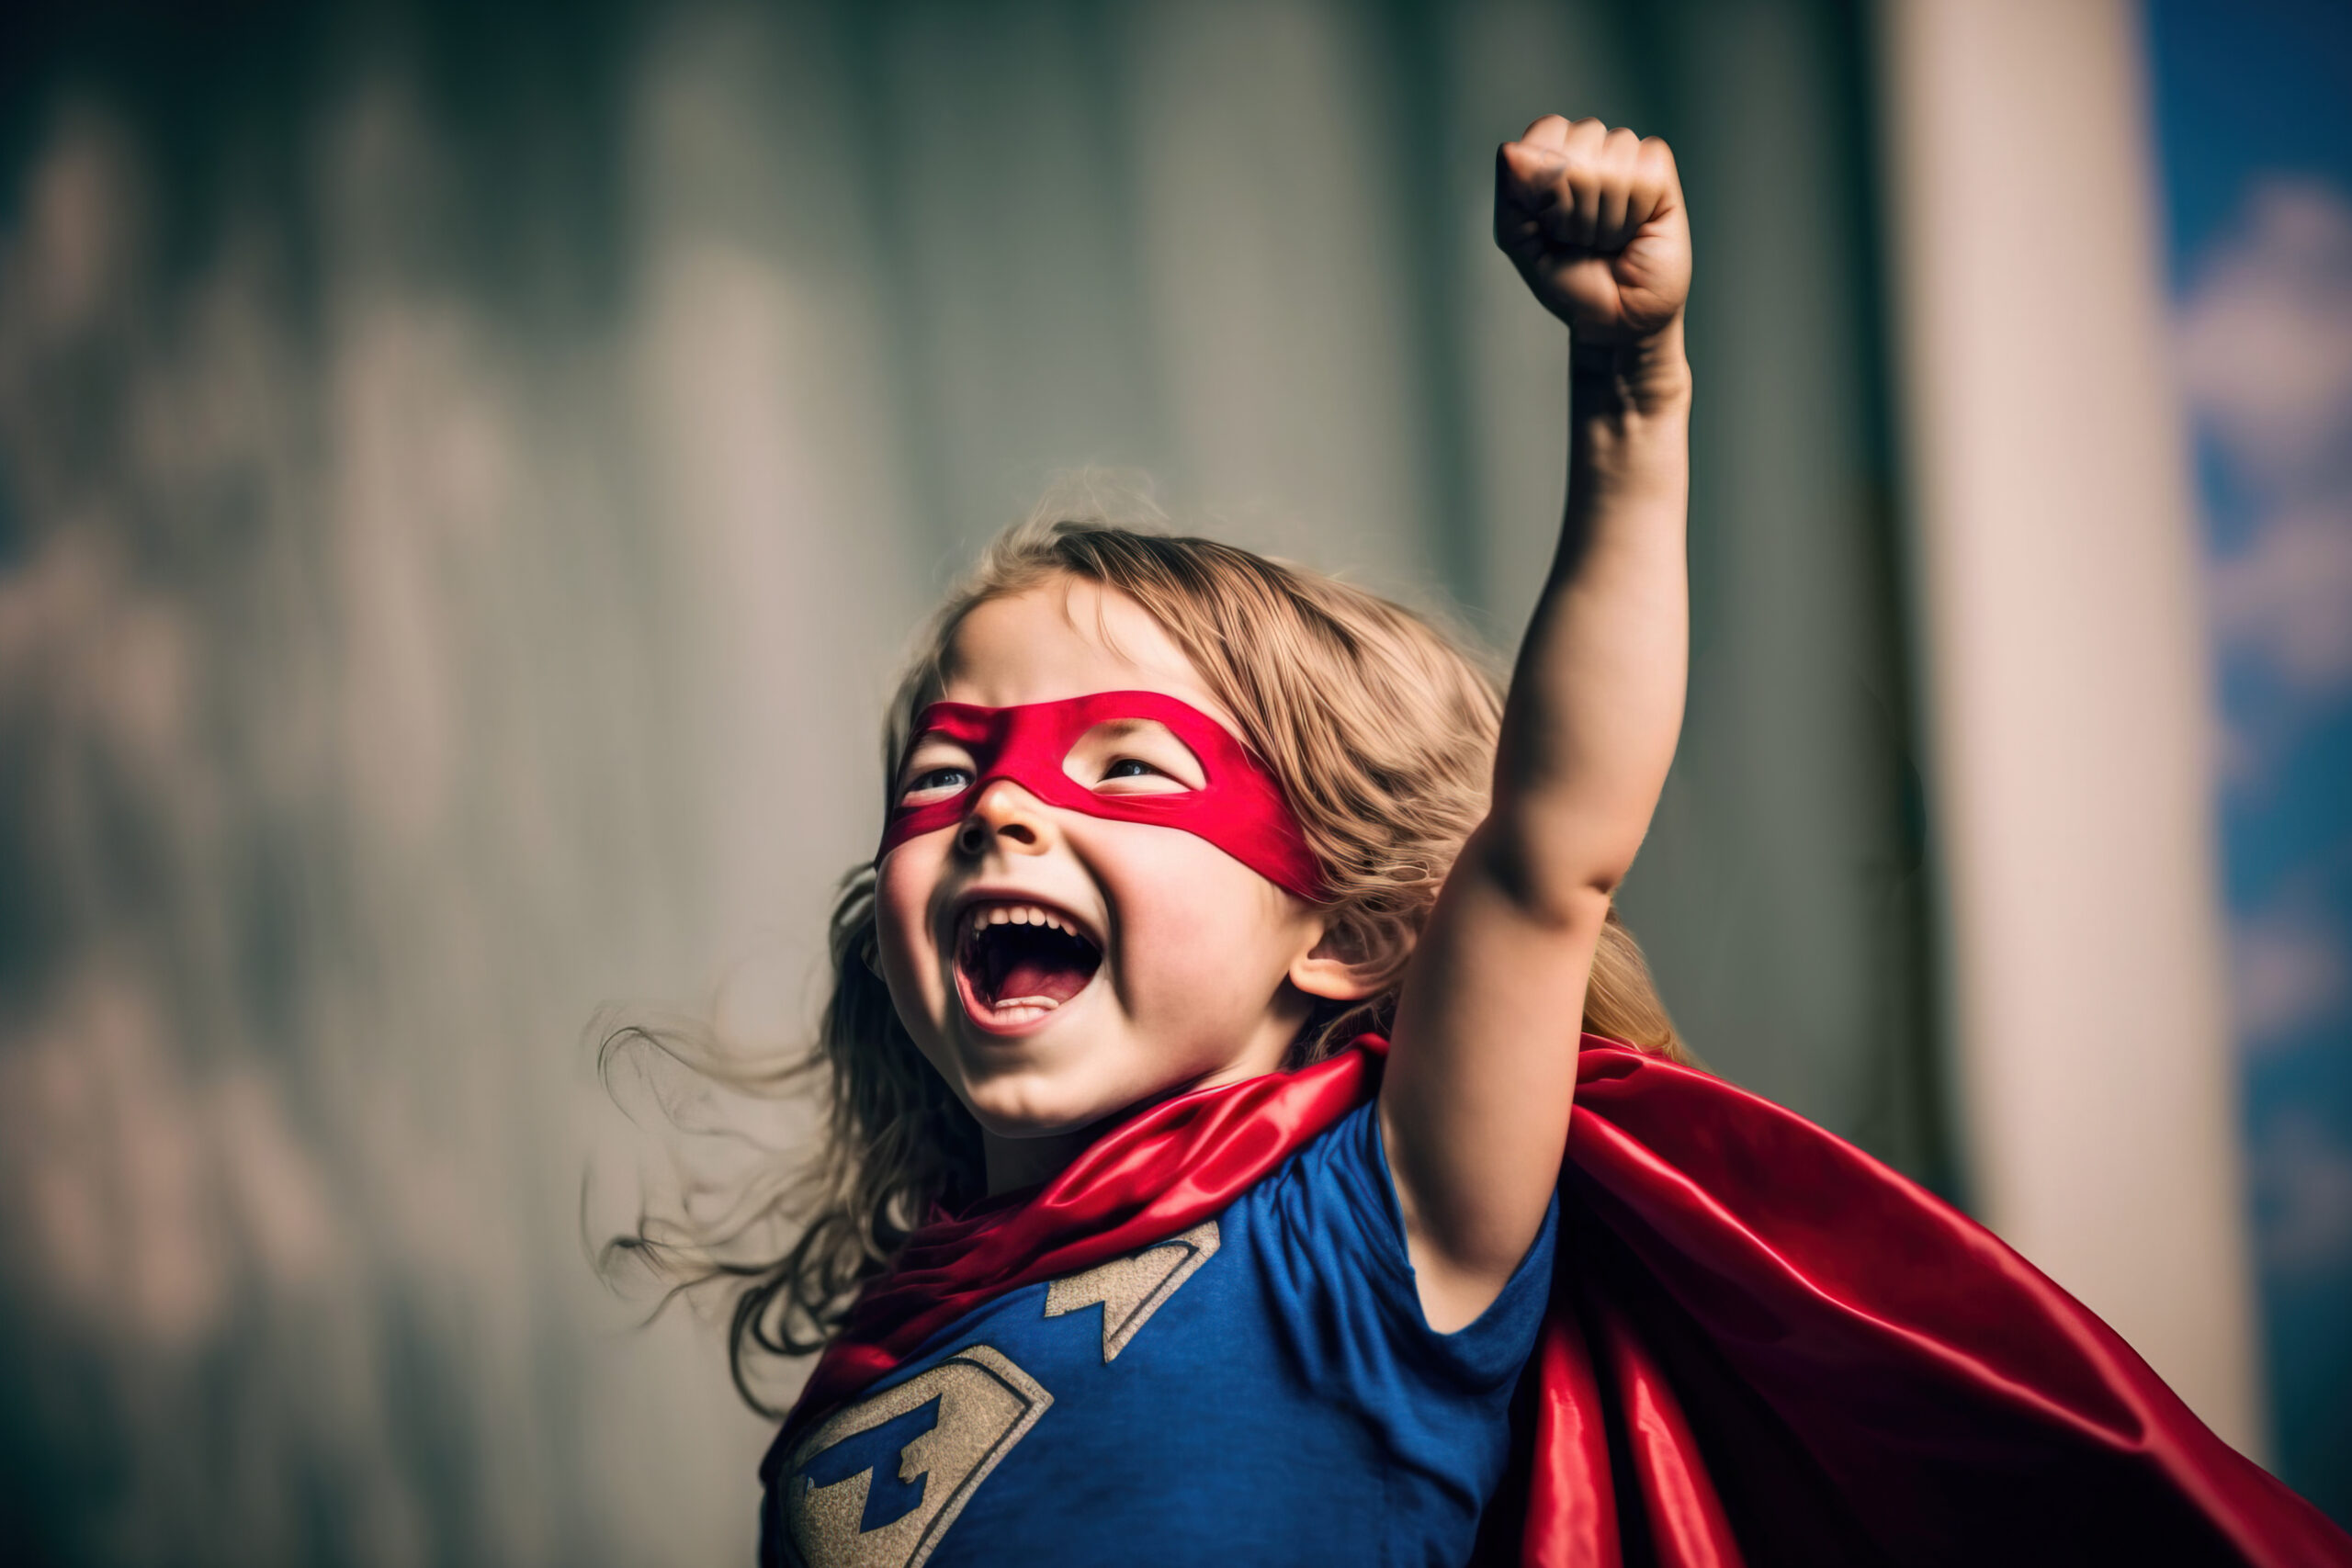 Get CSRS & FERS Training to prepare to retire ready and with confidence and be the hero in your own retirement story!